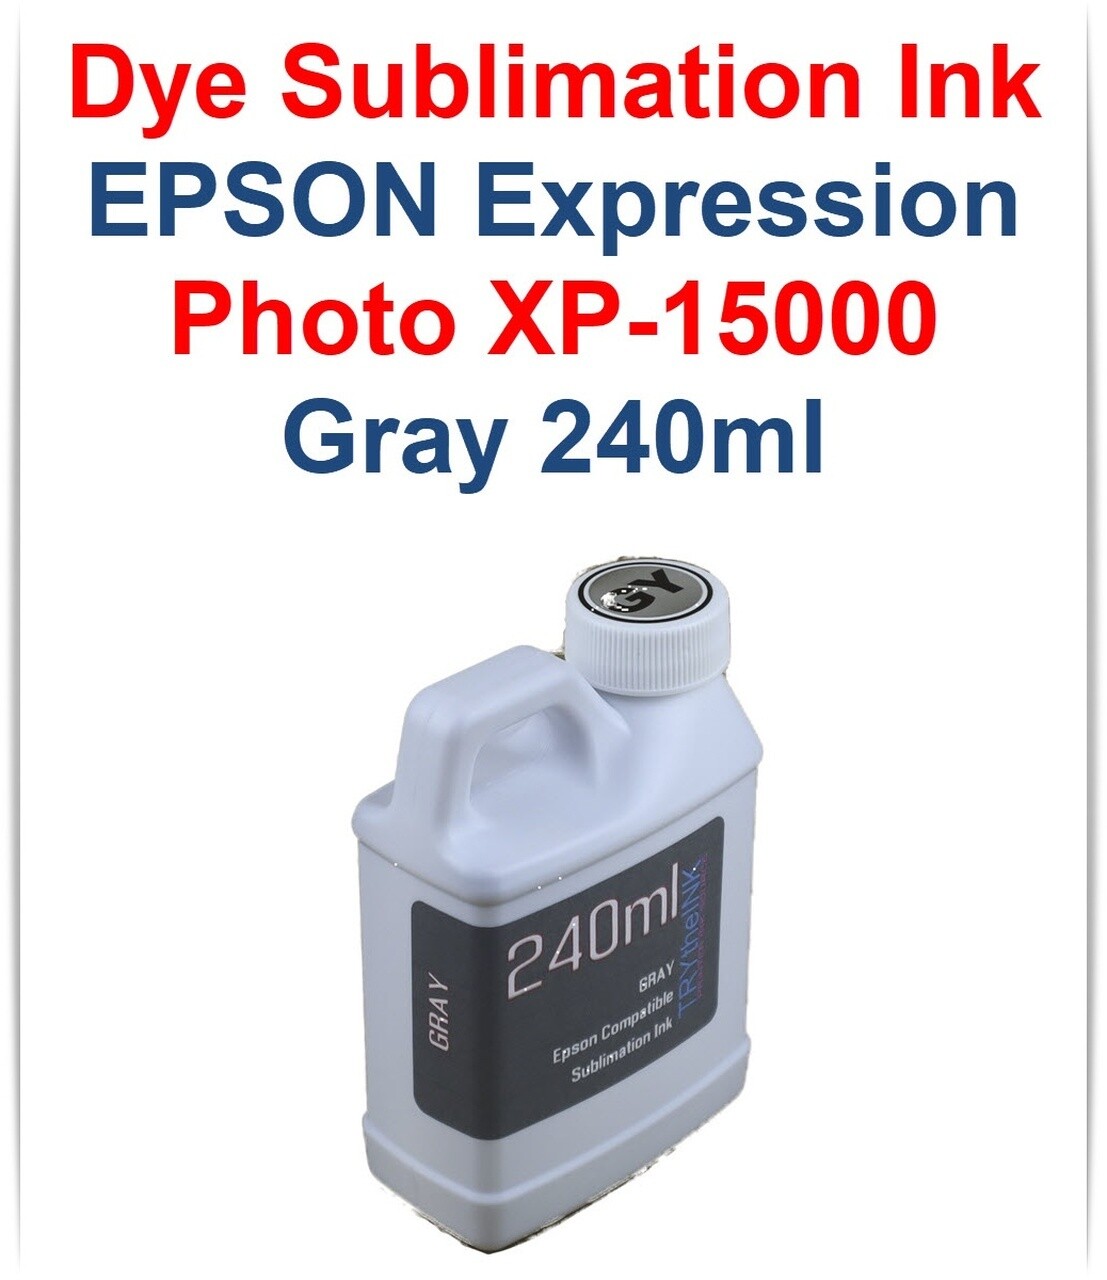 Gray Dye Sublimation Ink 240ml for Epson Expression Photo HD XP-15000 printer